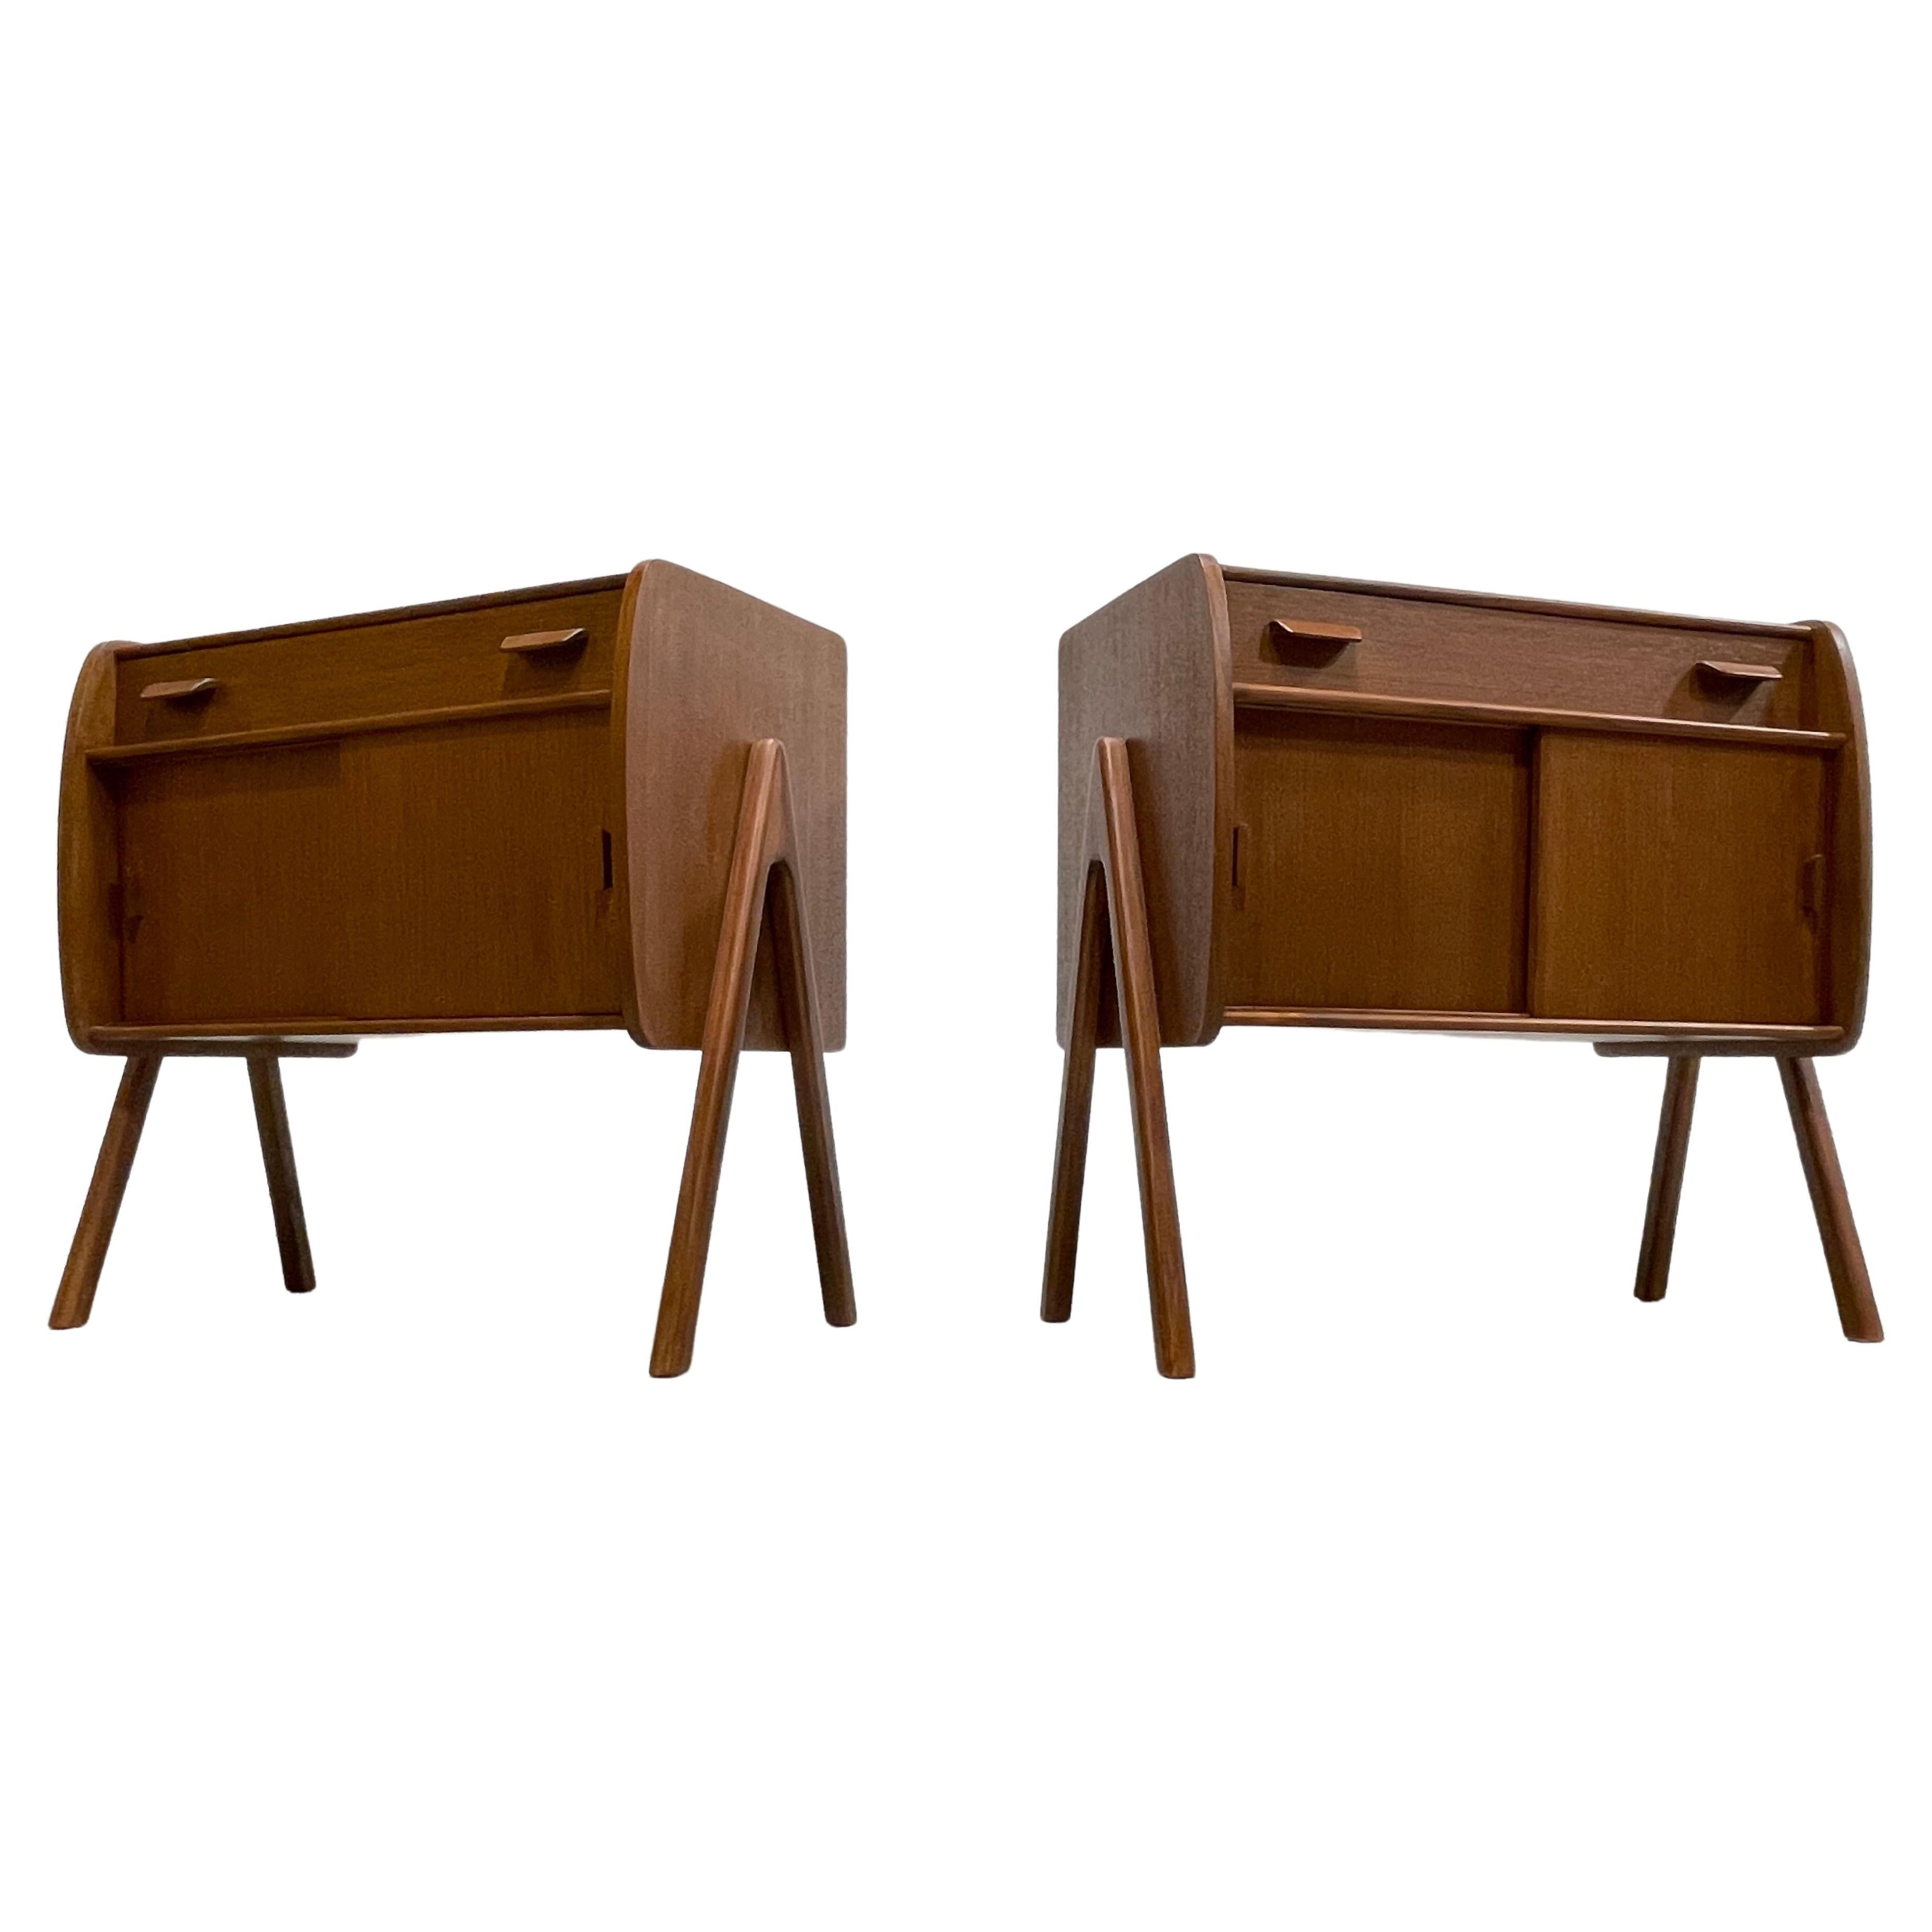 Pair of Handmade Mid-Century Modern styled Teak Cabinets / Entryway Cabinets. Perfect bedside cabinets or storage cabinets anywhere in your home. Fantastic design details such as floating legs, sliding doors and drawer storage and finished back.